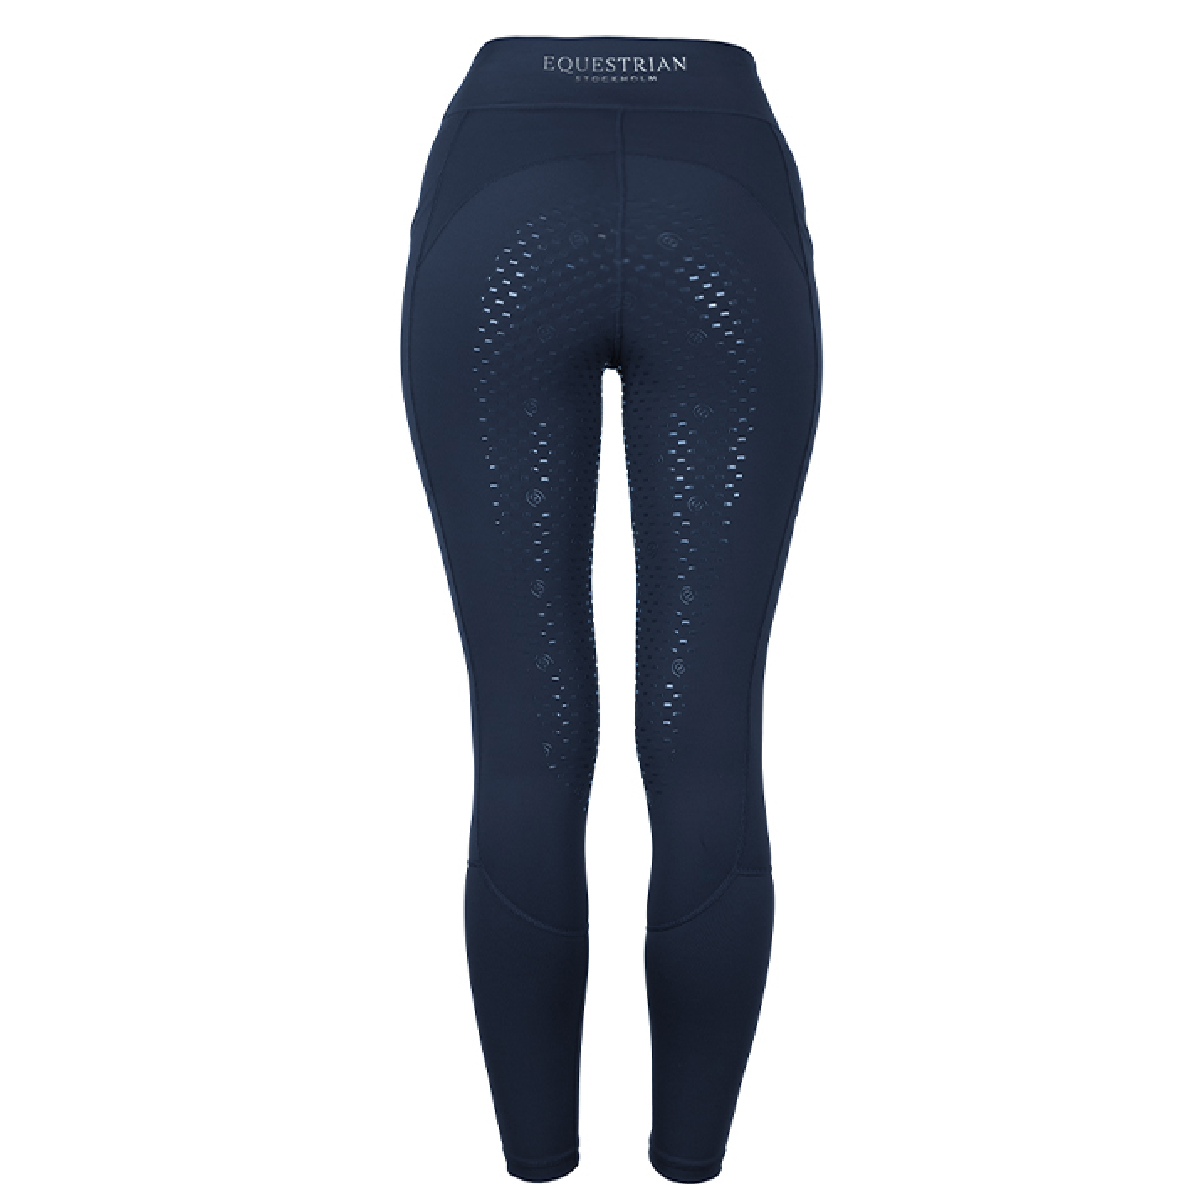 Equestrian Stockholm Movement Dressage Riding Tights Navy